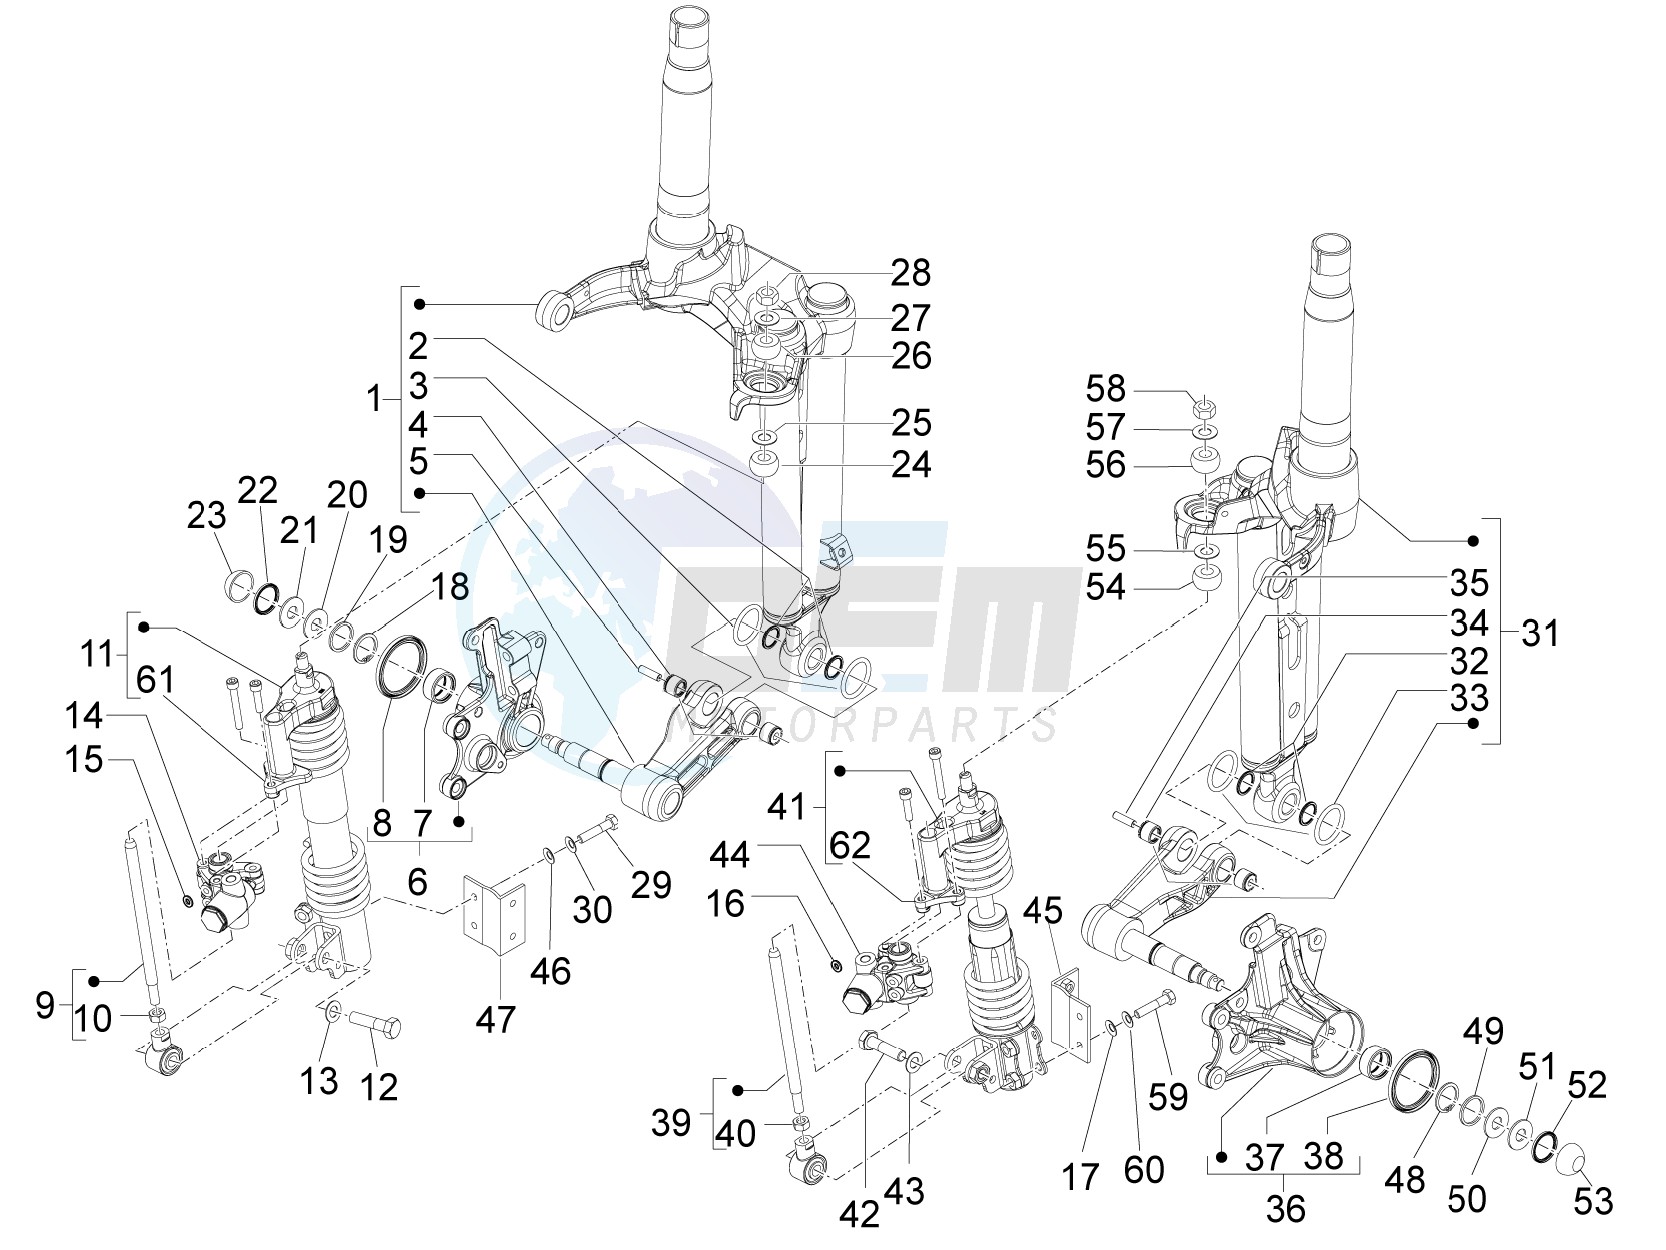 Front fork components (Mingxing) image